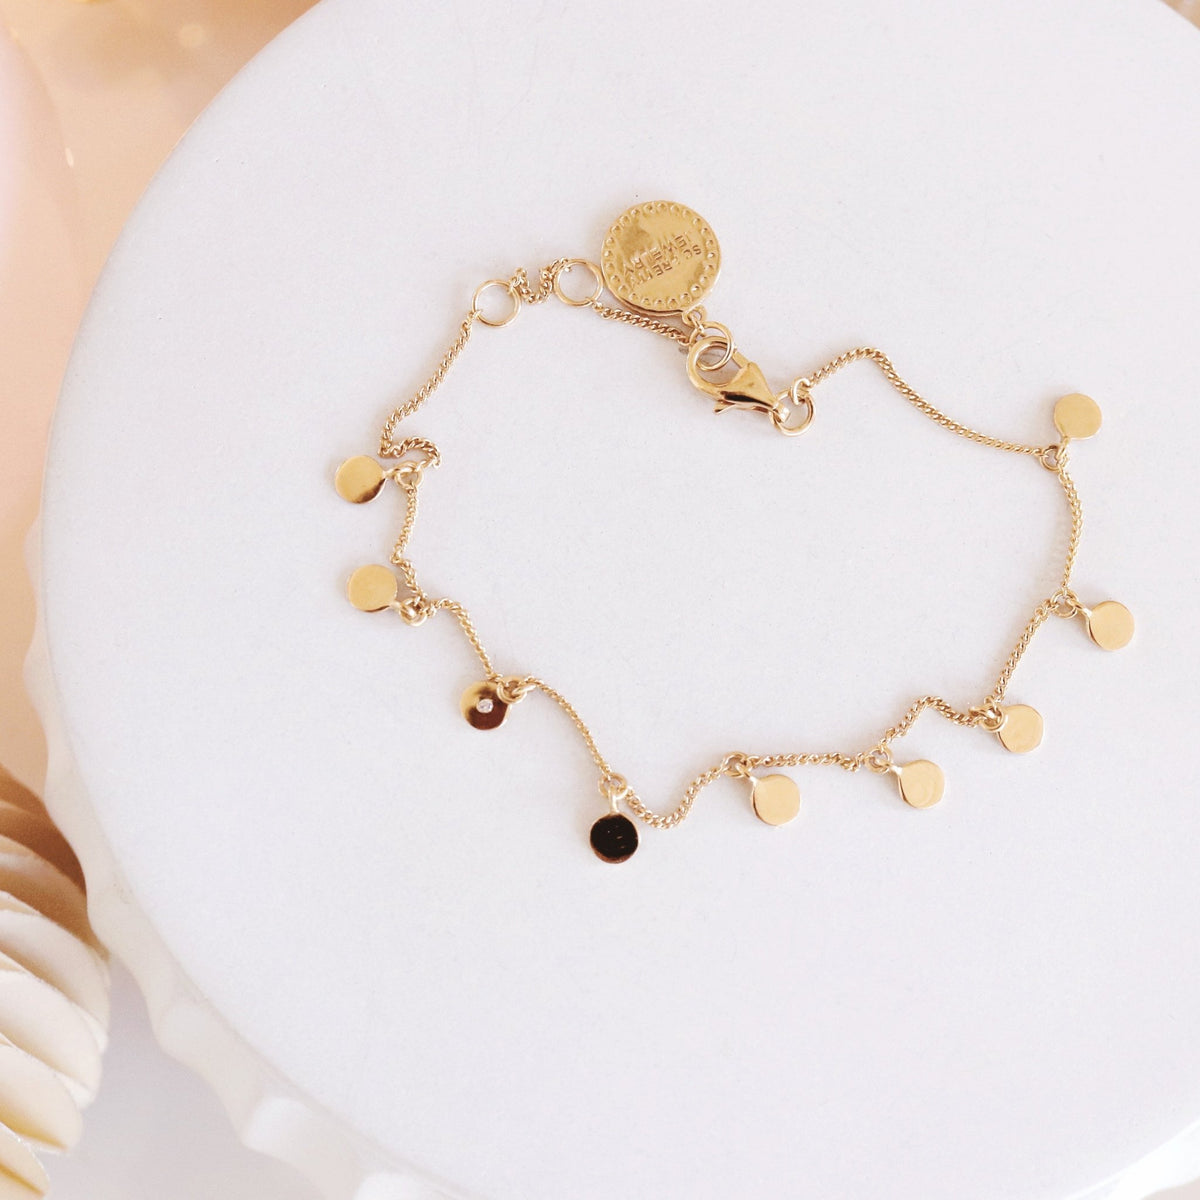 DAY 3 - POISE DISK BRACELET - GOLD, ROSE GOLD, OR SILVER - SO PRETTY CARA COTTER